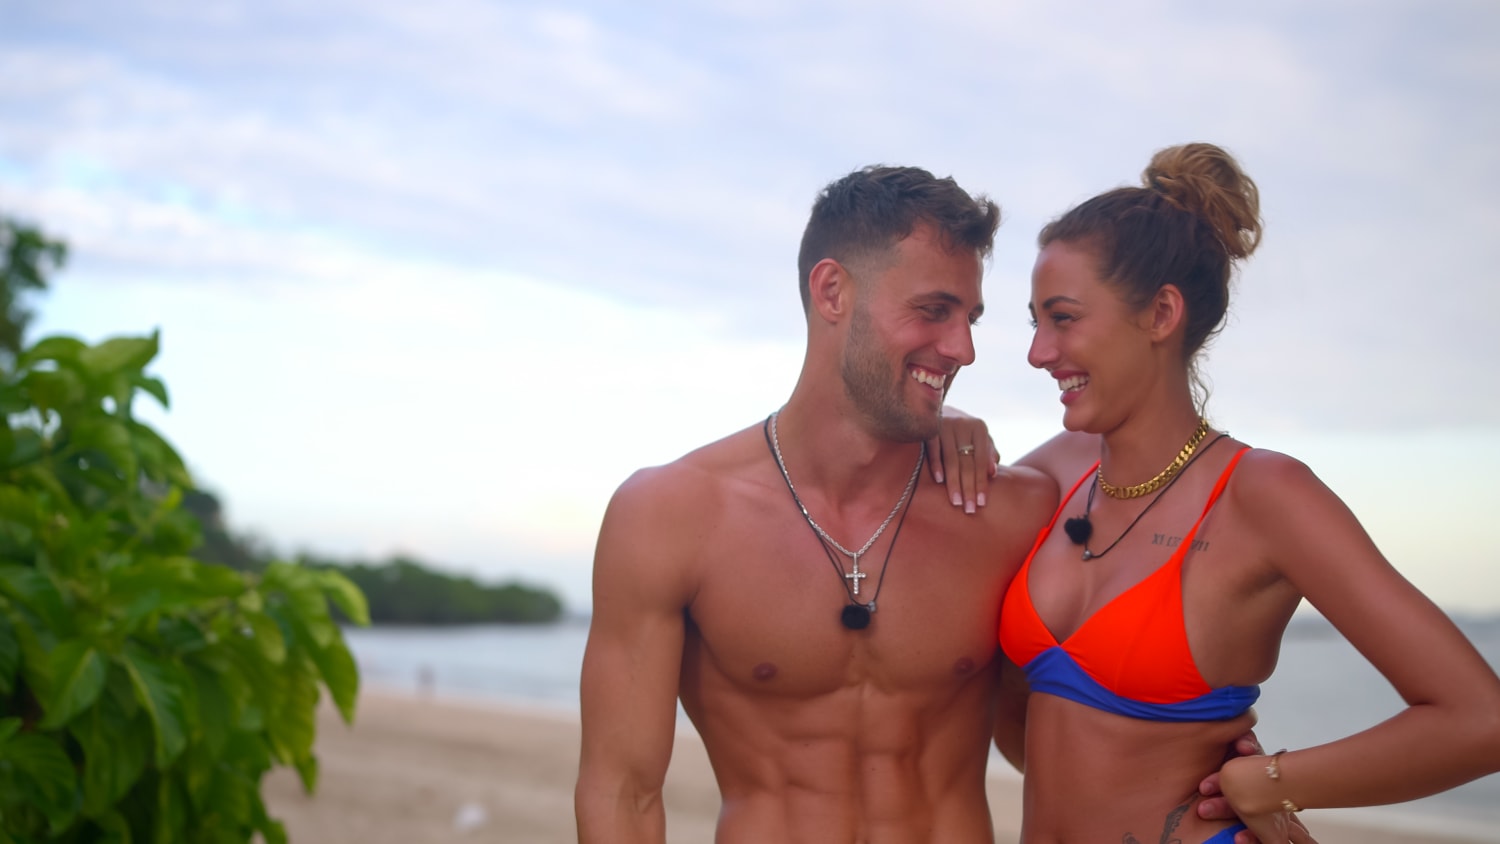 Are Chloe And Shayne From 'Perfect Match' Still Together?